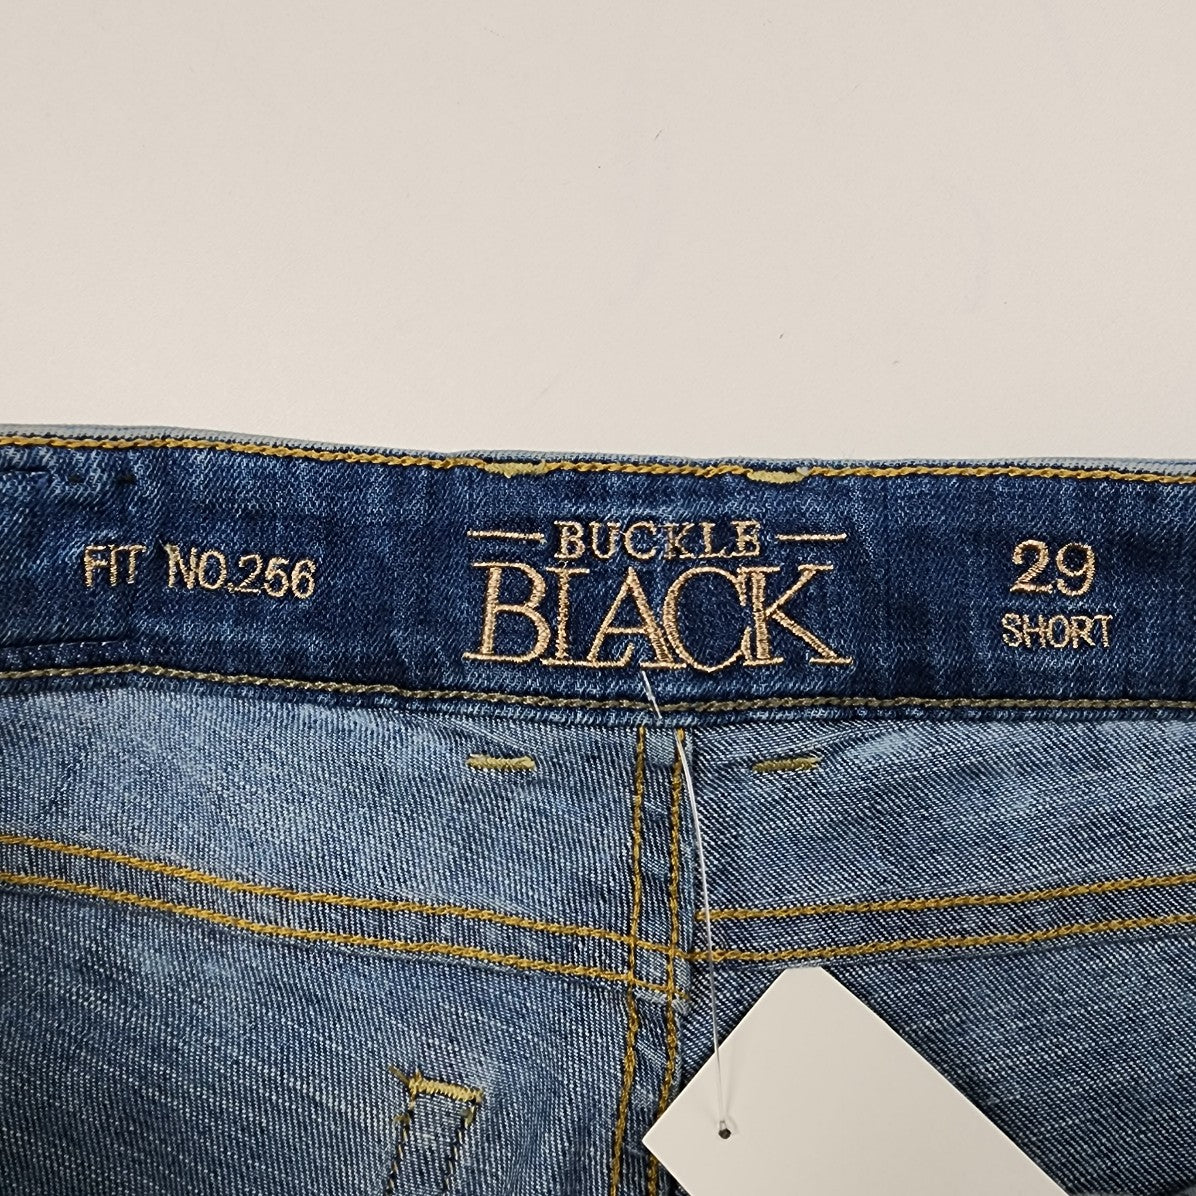 Buckle Black Distressed Jean Shorts Size 29